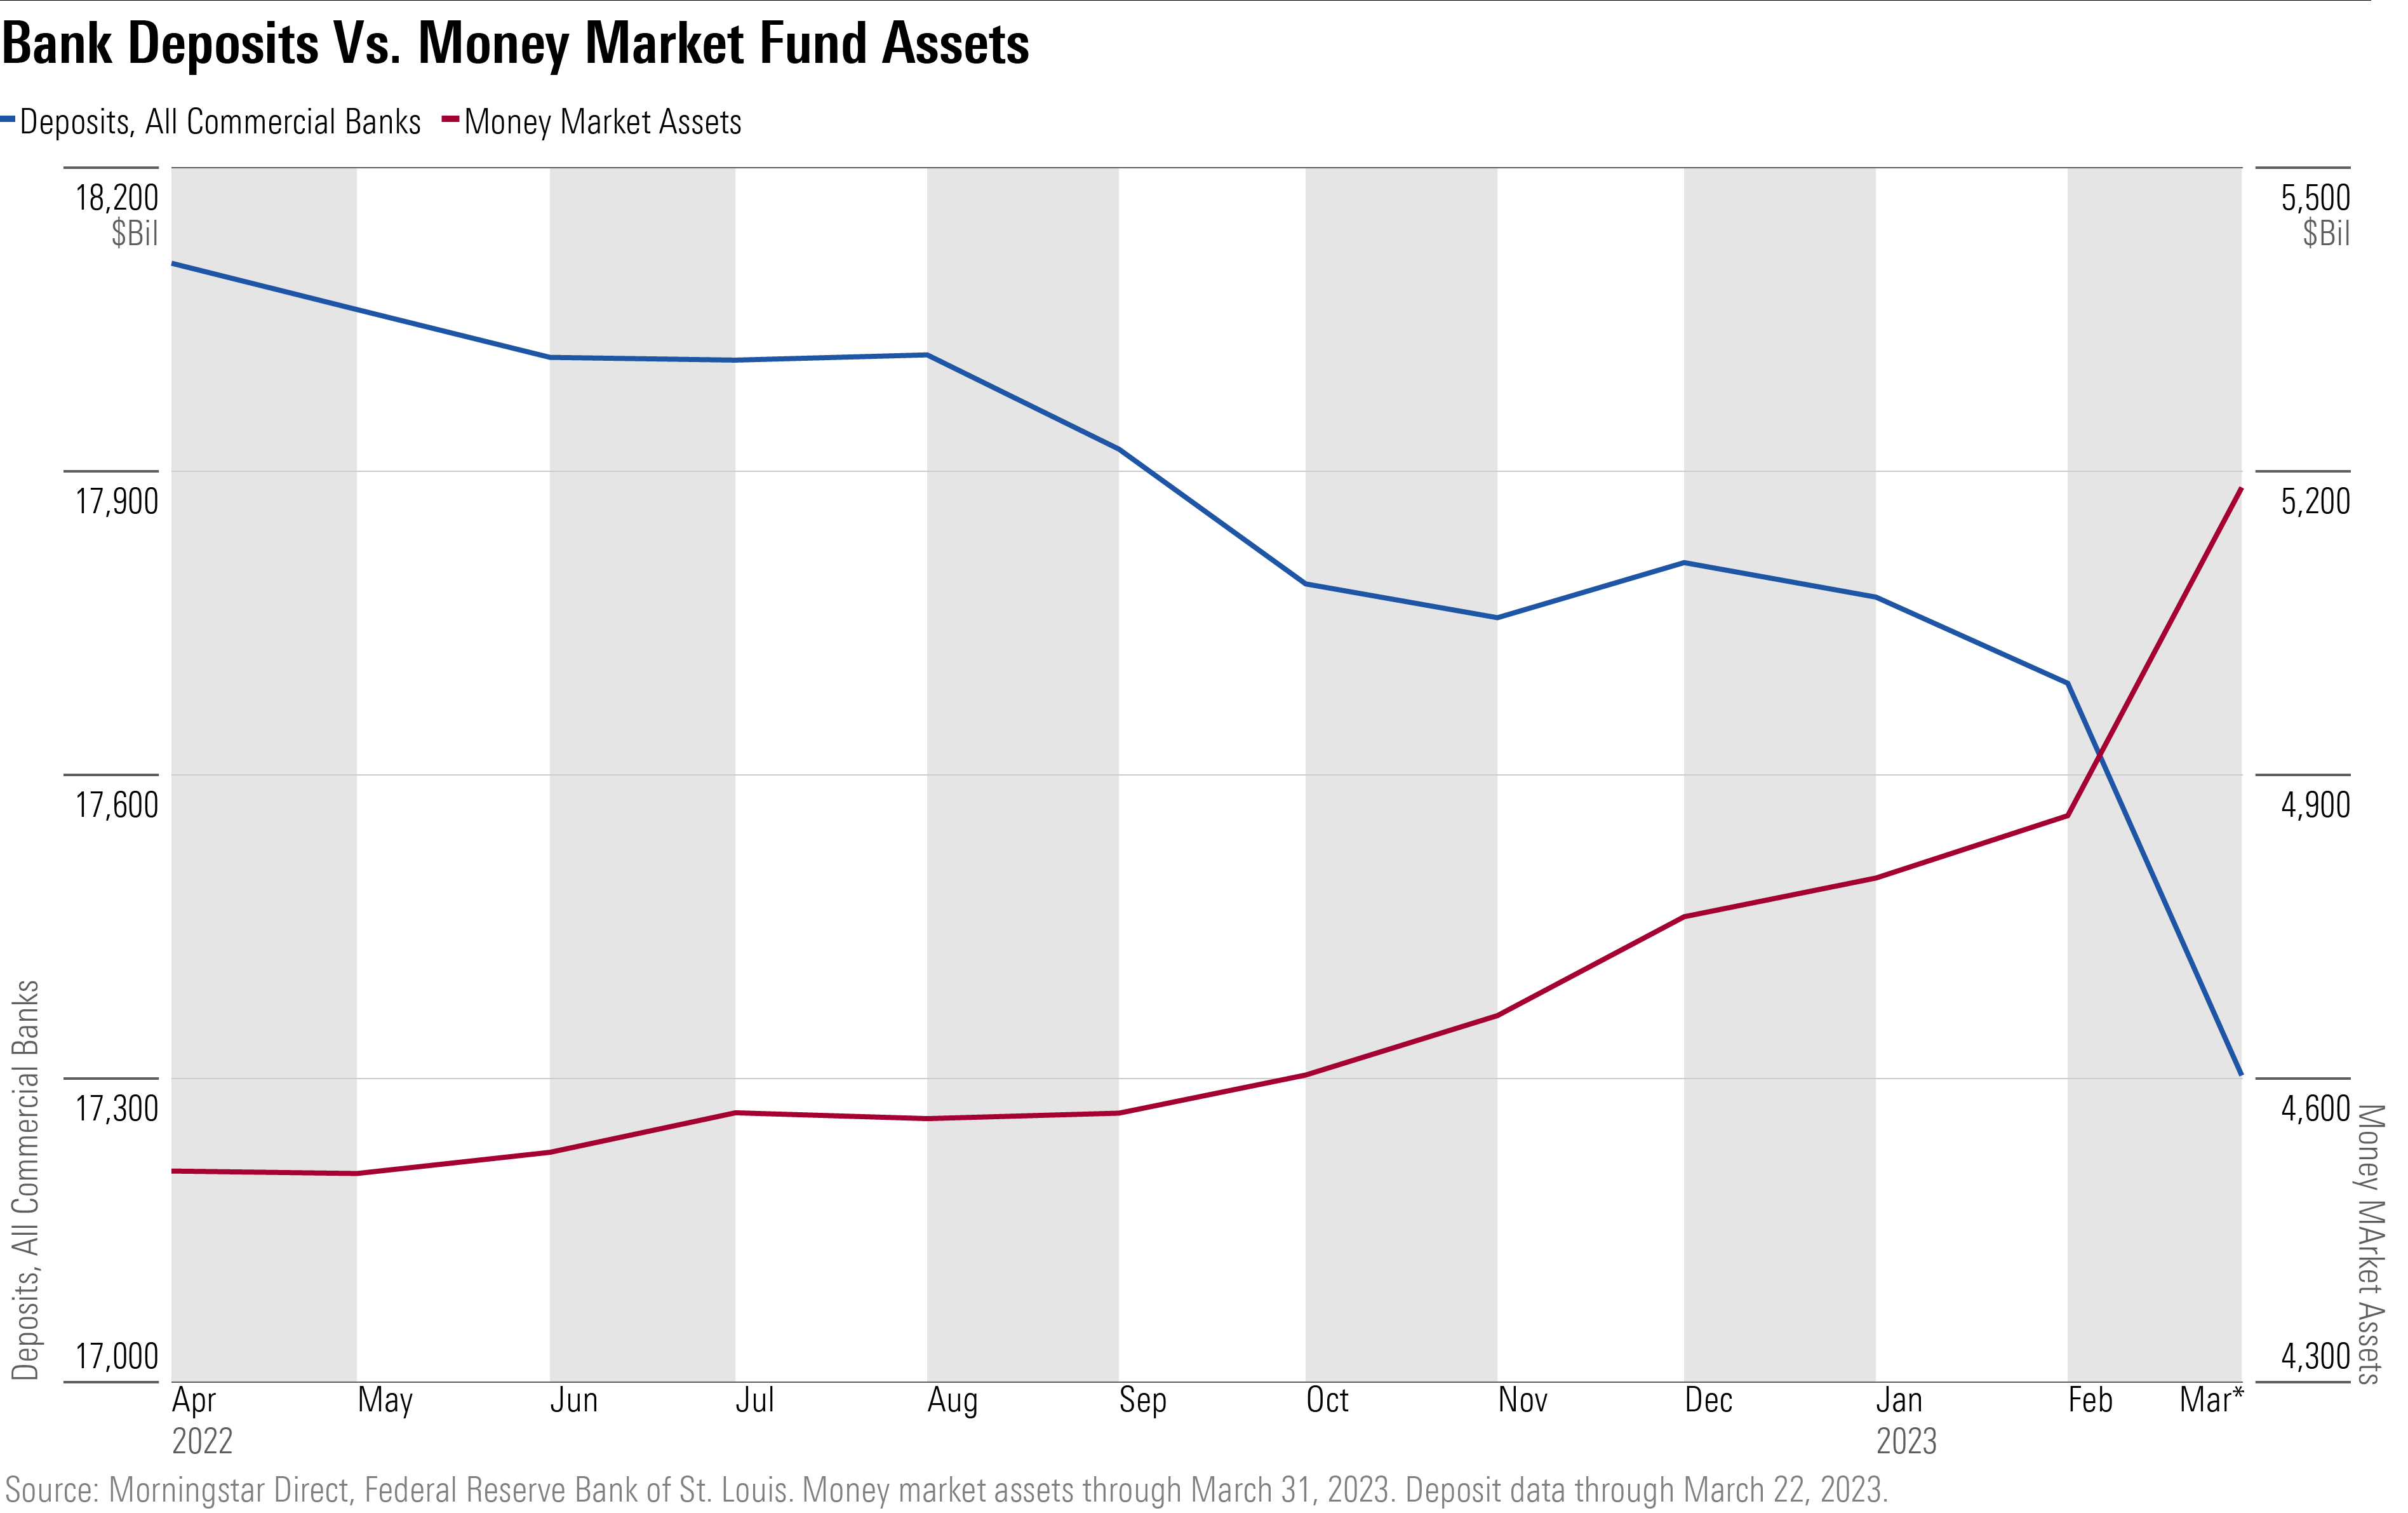 A line chart showing deposits from commercial banks versus assets under management in money market funds.